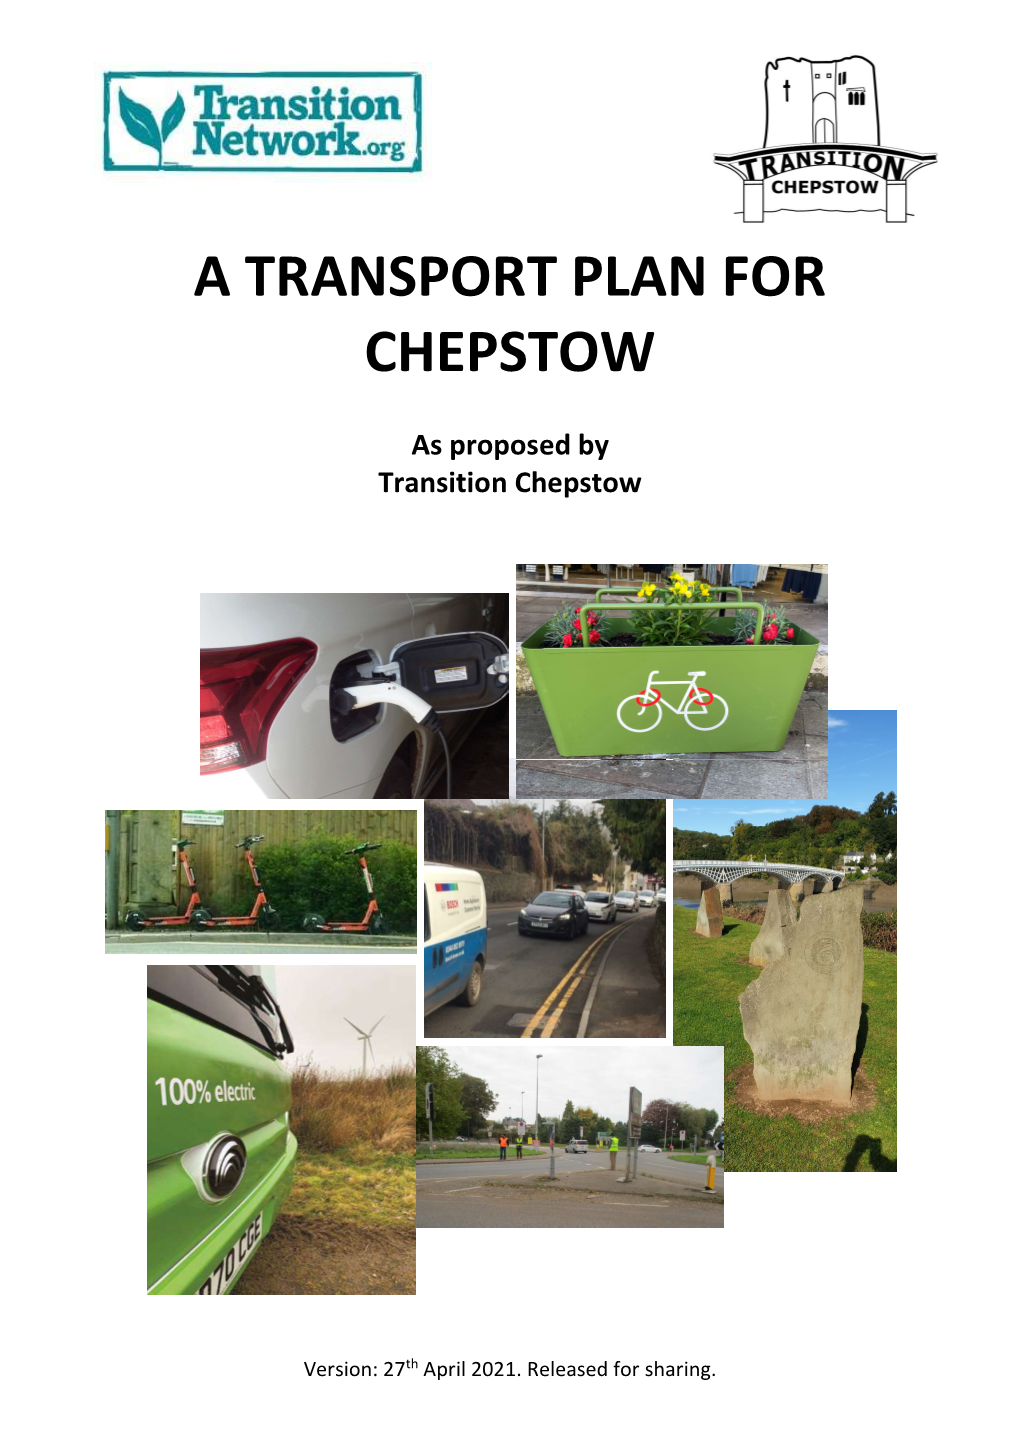 A Transport Plan for Chepstow